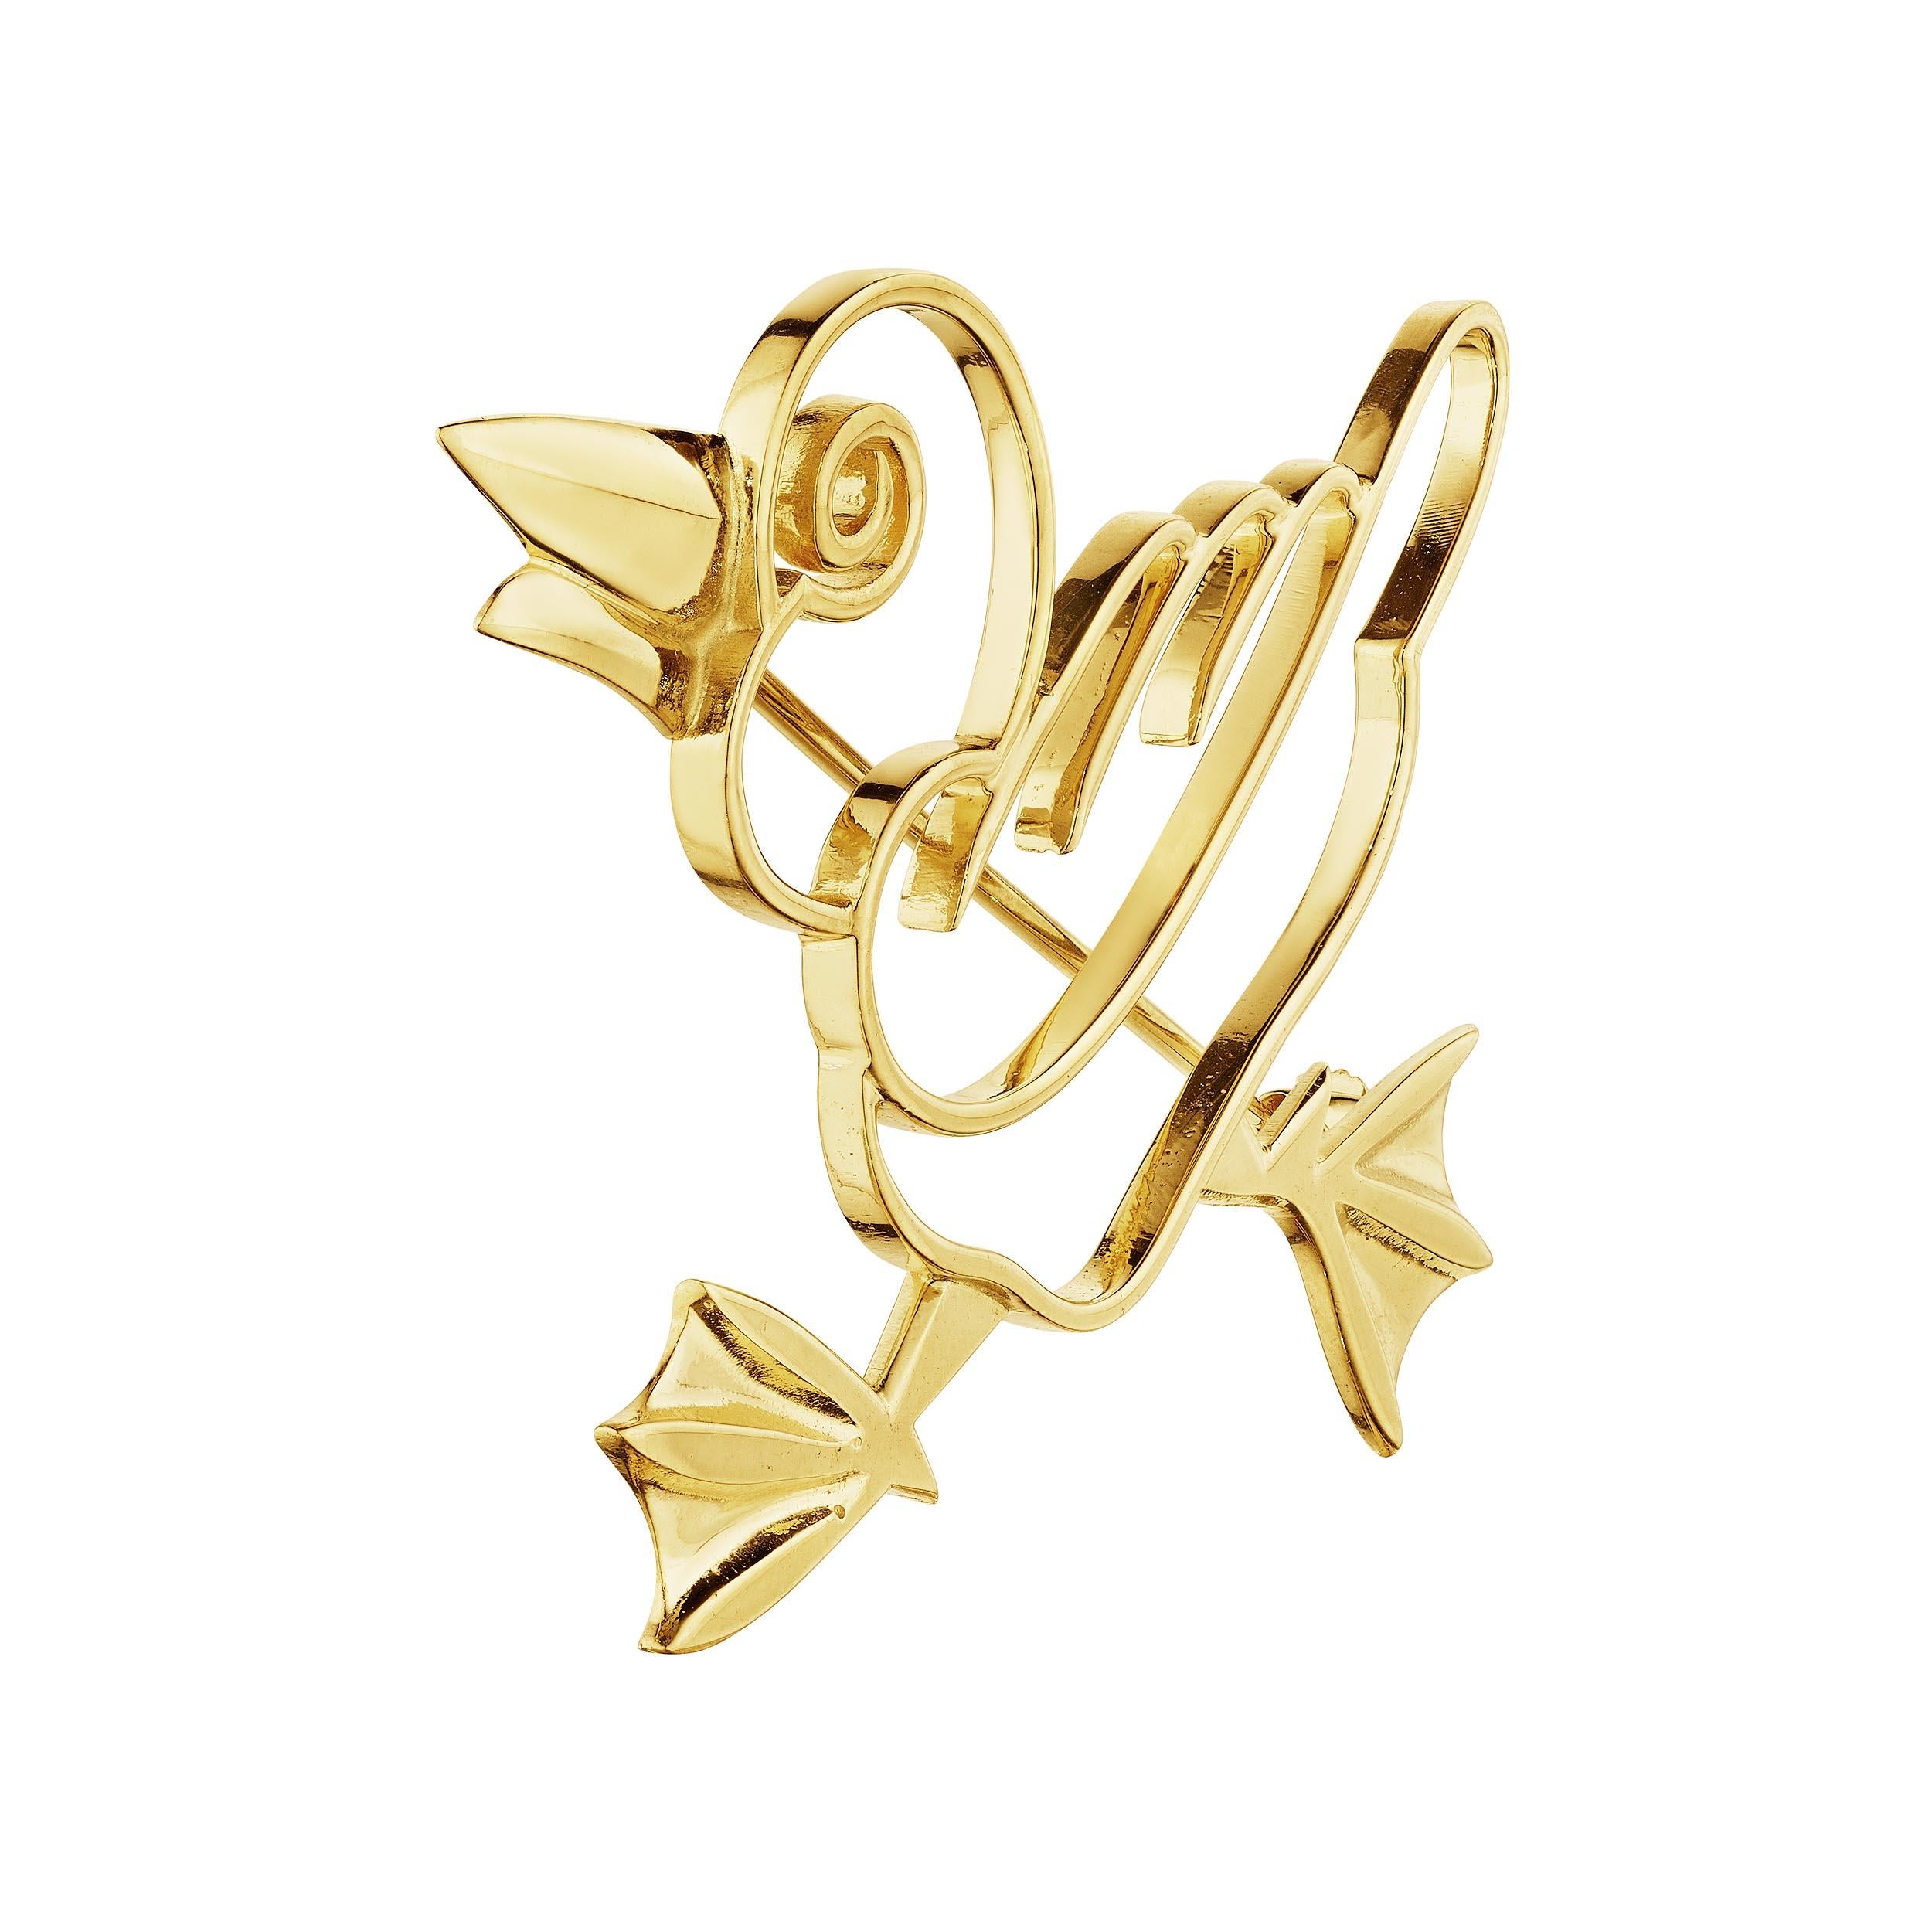 If it walks like a duck and quacks like a duck then it probably is a duck, and this Tiffany & Co. mid-century 14 karat yellow gold duck brooch is an authentic bird.  Signed Tiffany & Co.  Circa 1950-55.  2